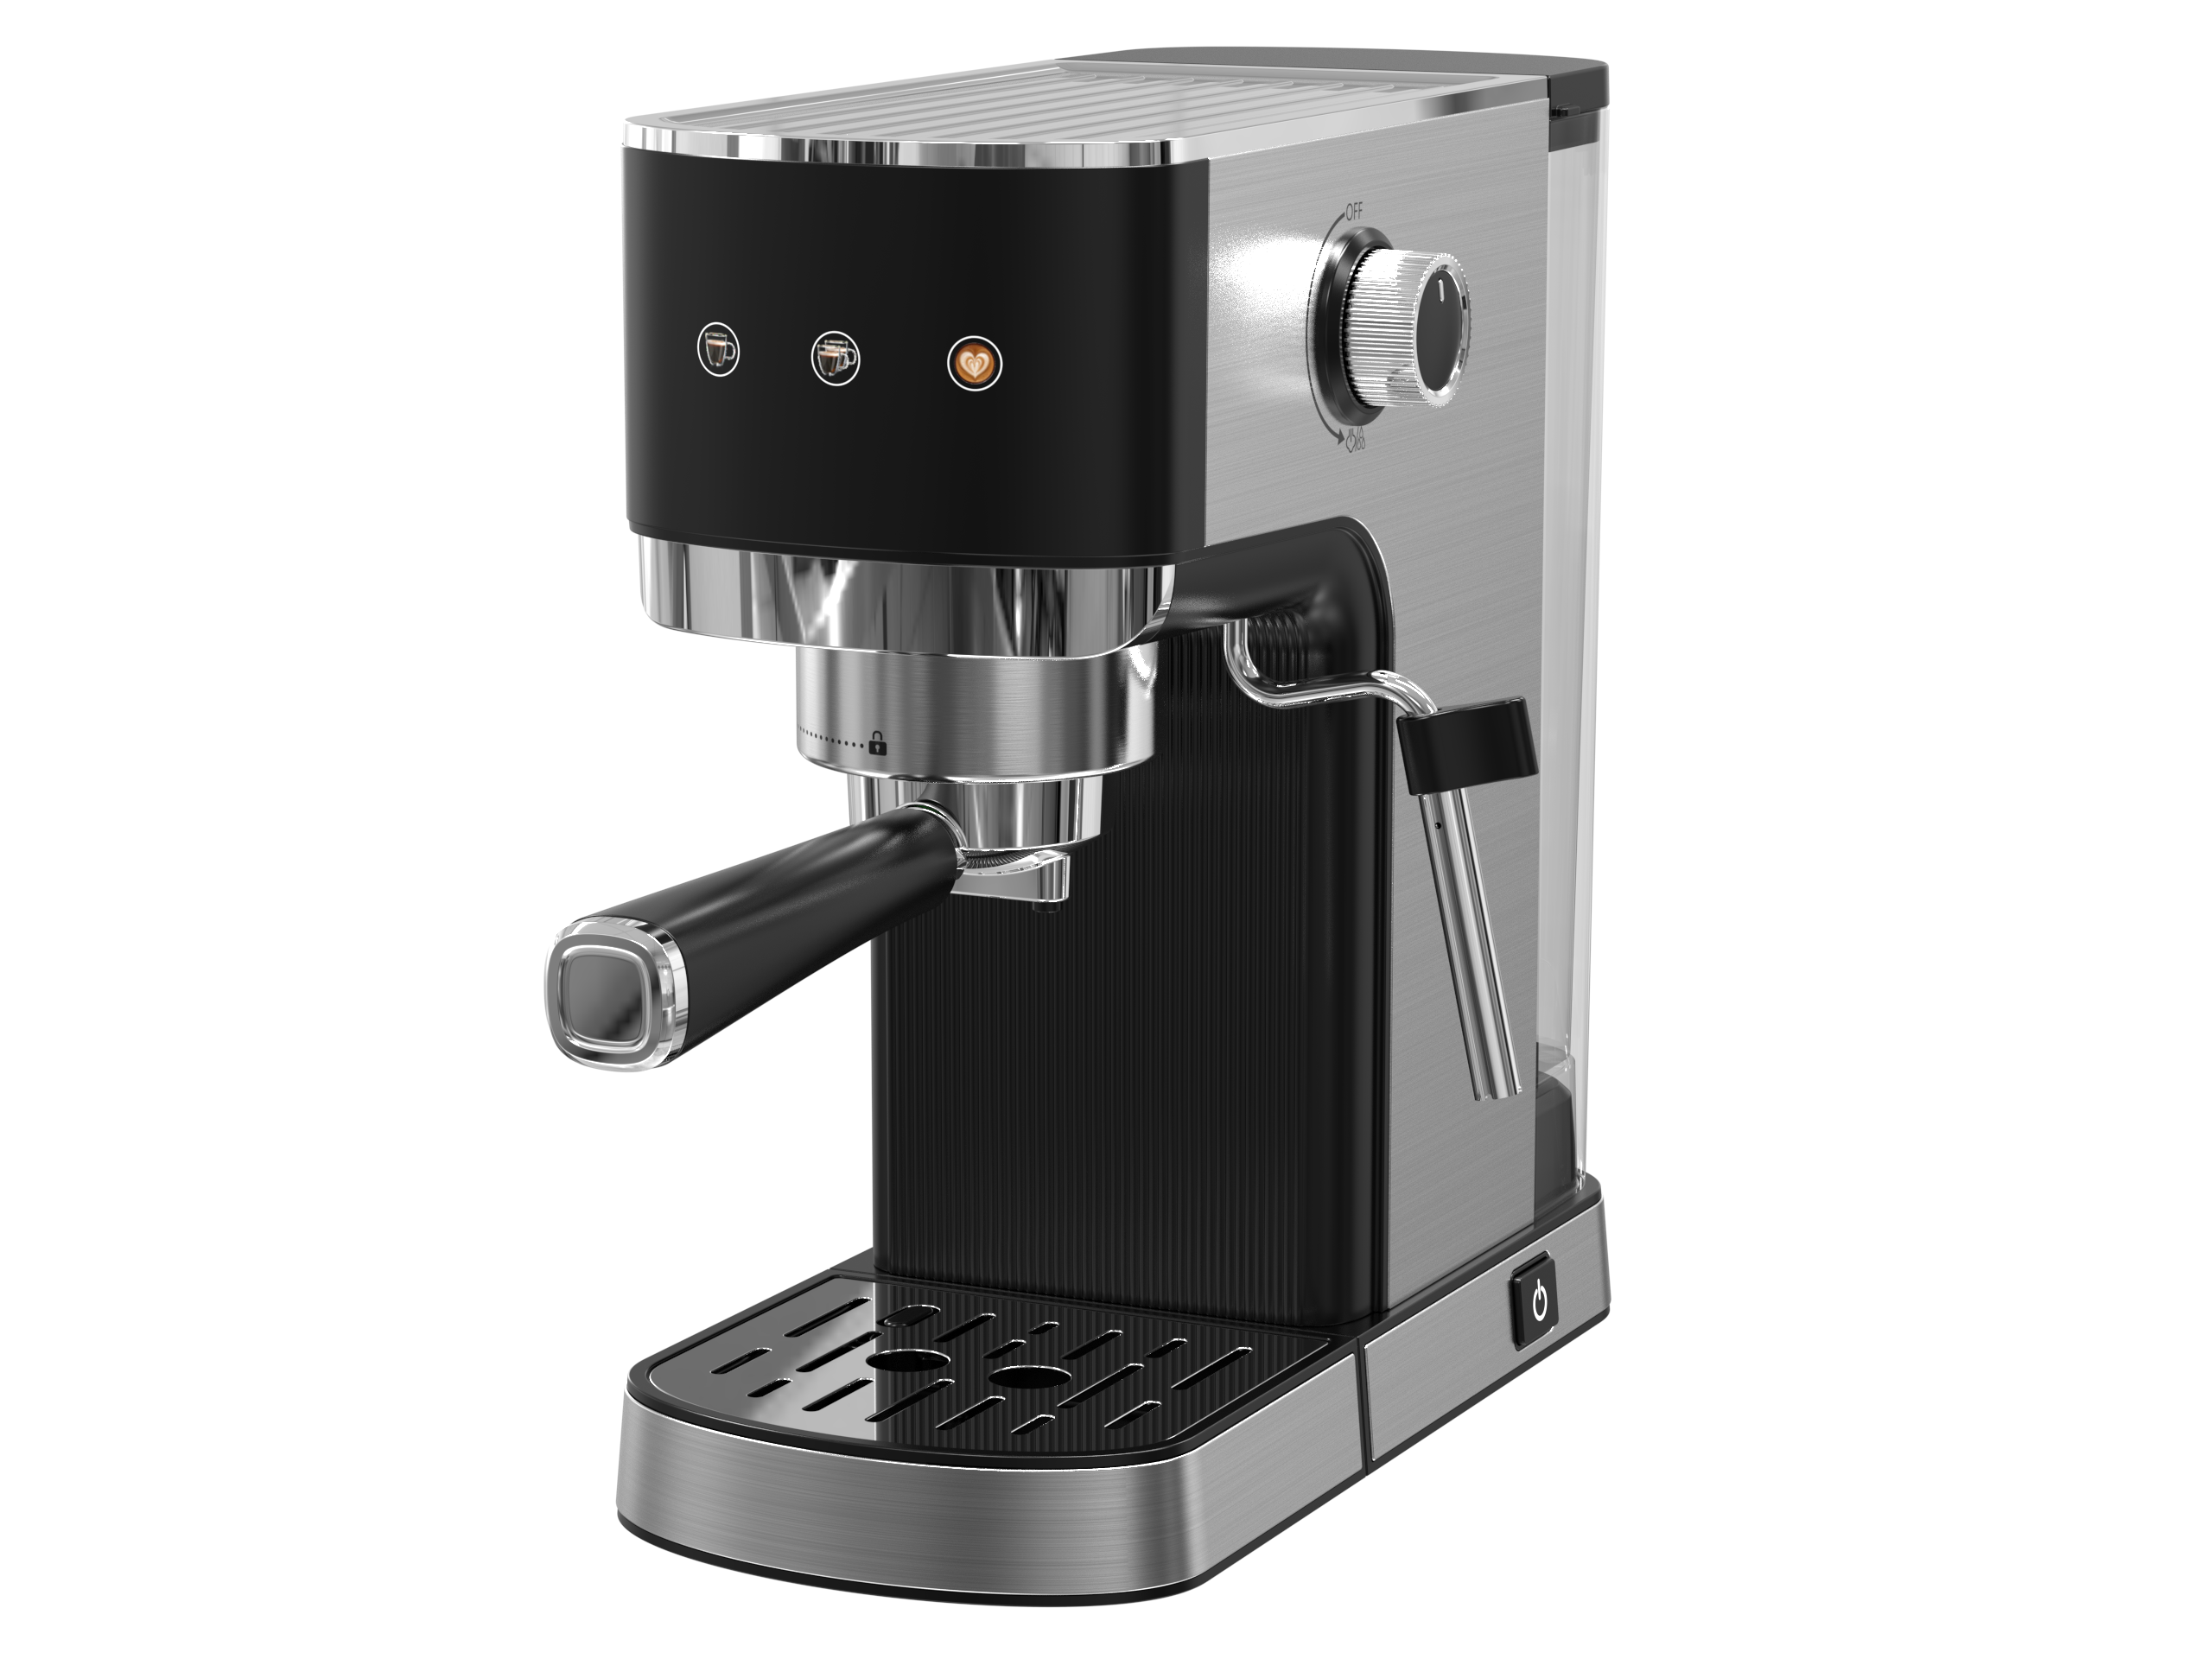 WHALL® Touchscreen Espresso Machine 20 Bar，Espresso Coffee Maker with Milk Frother Steam Wand, Stainless Steel Coffee Machine with Removable Water Tank